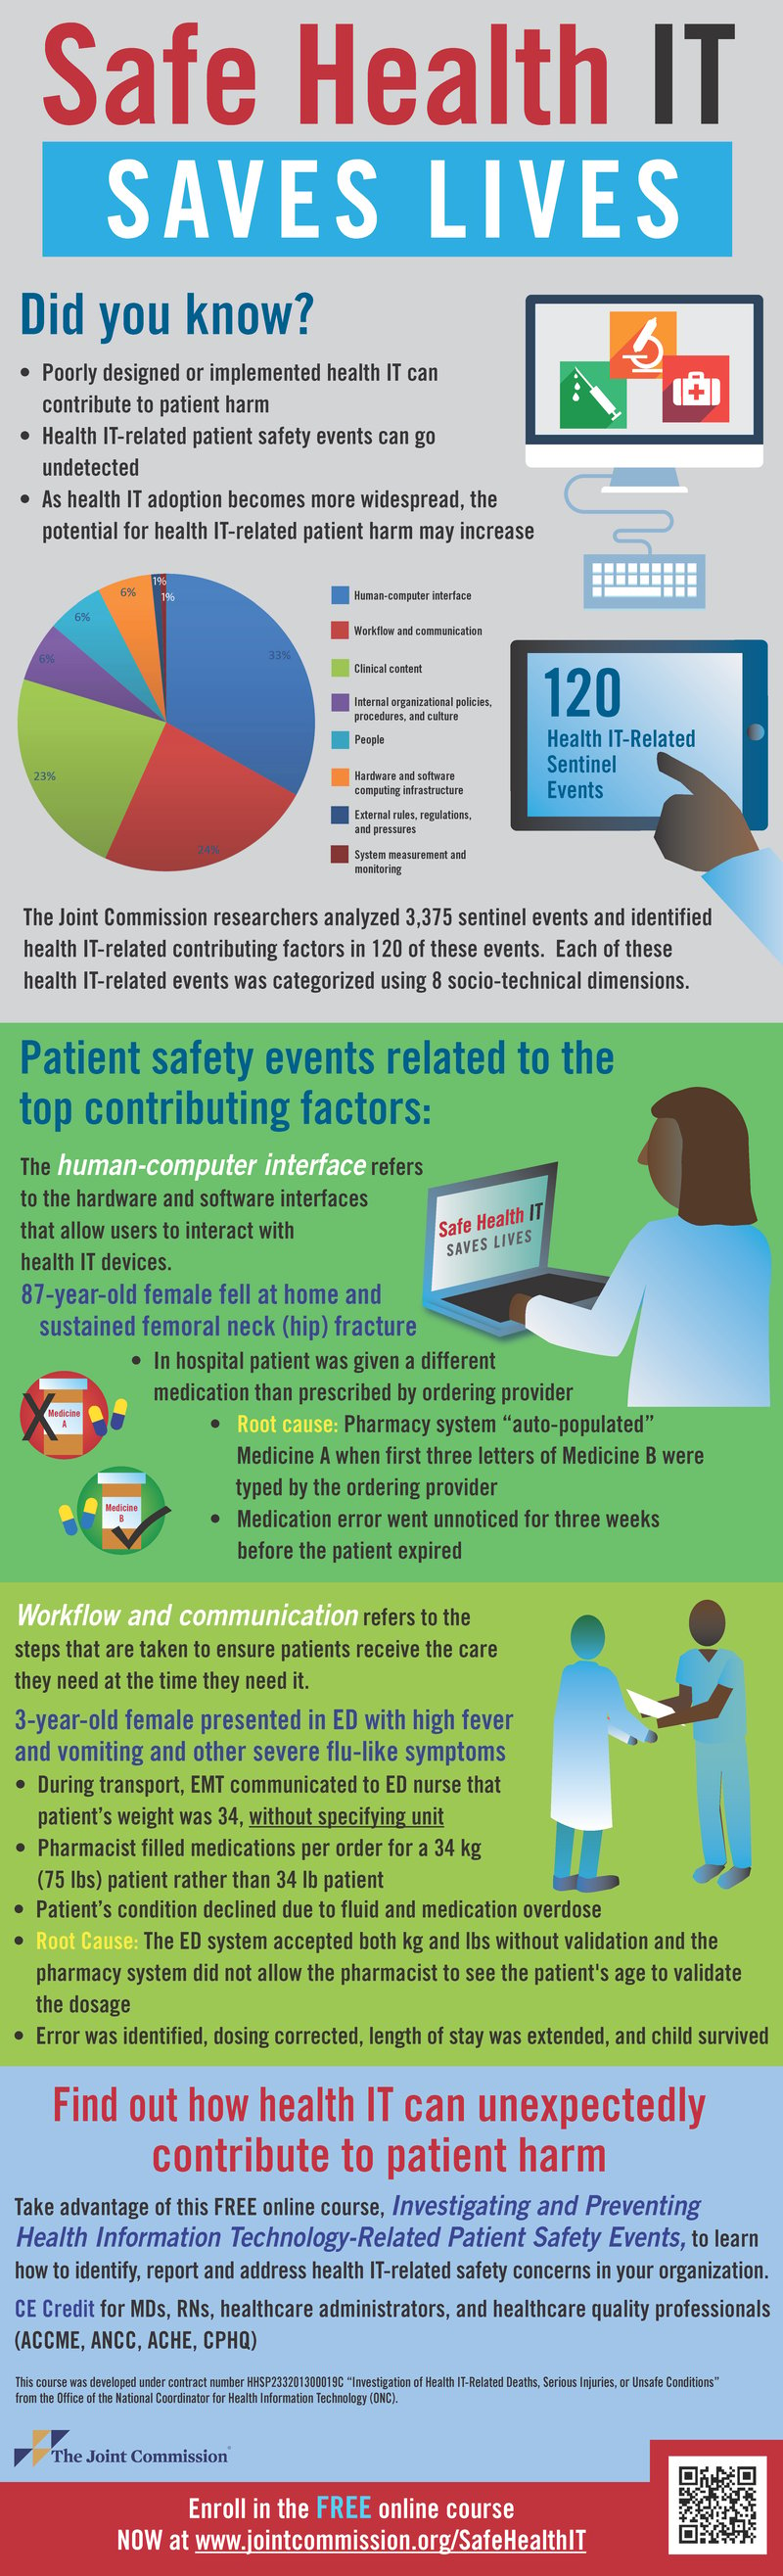 Safe_Health_IT_infographic_1-26